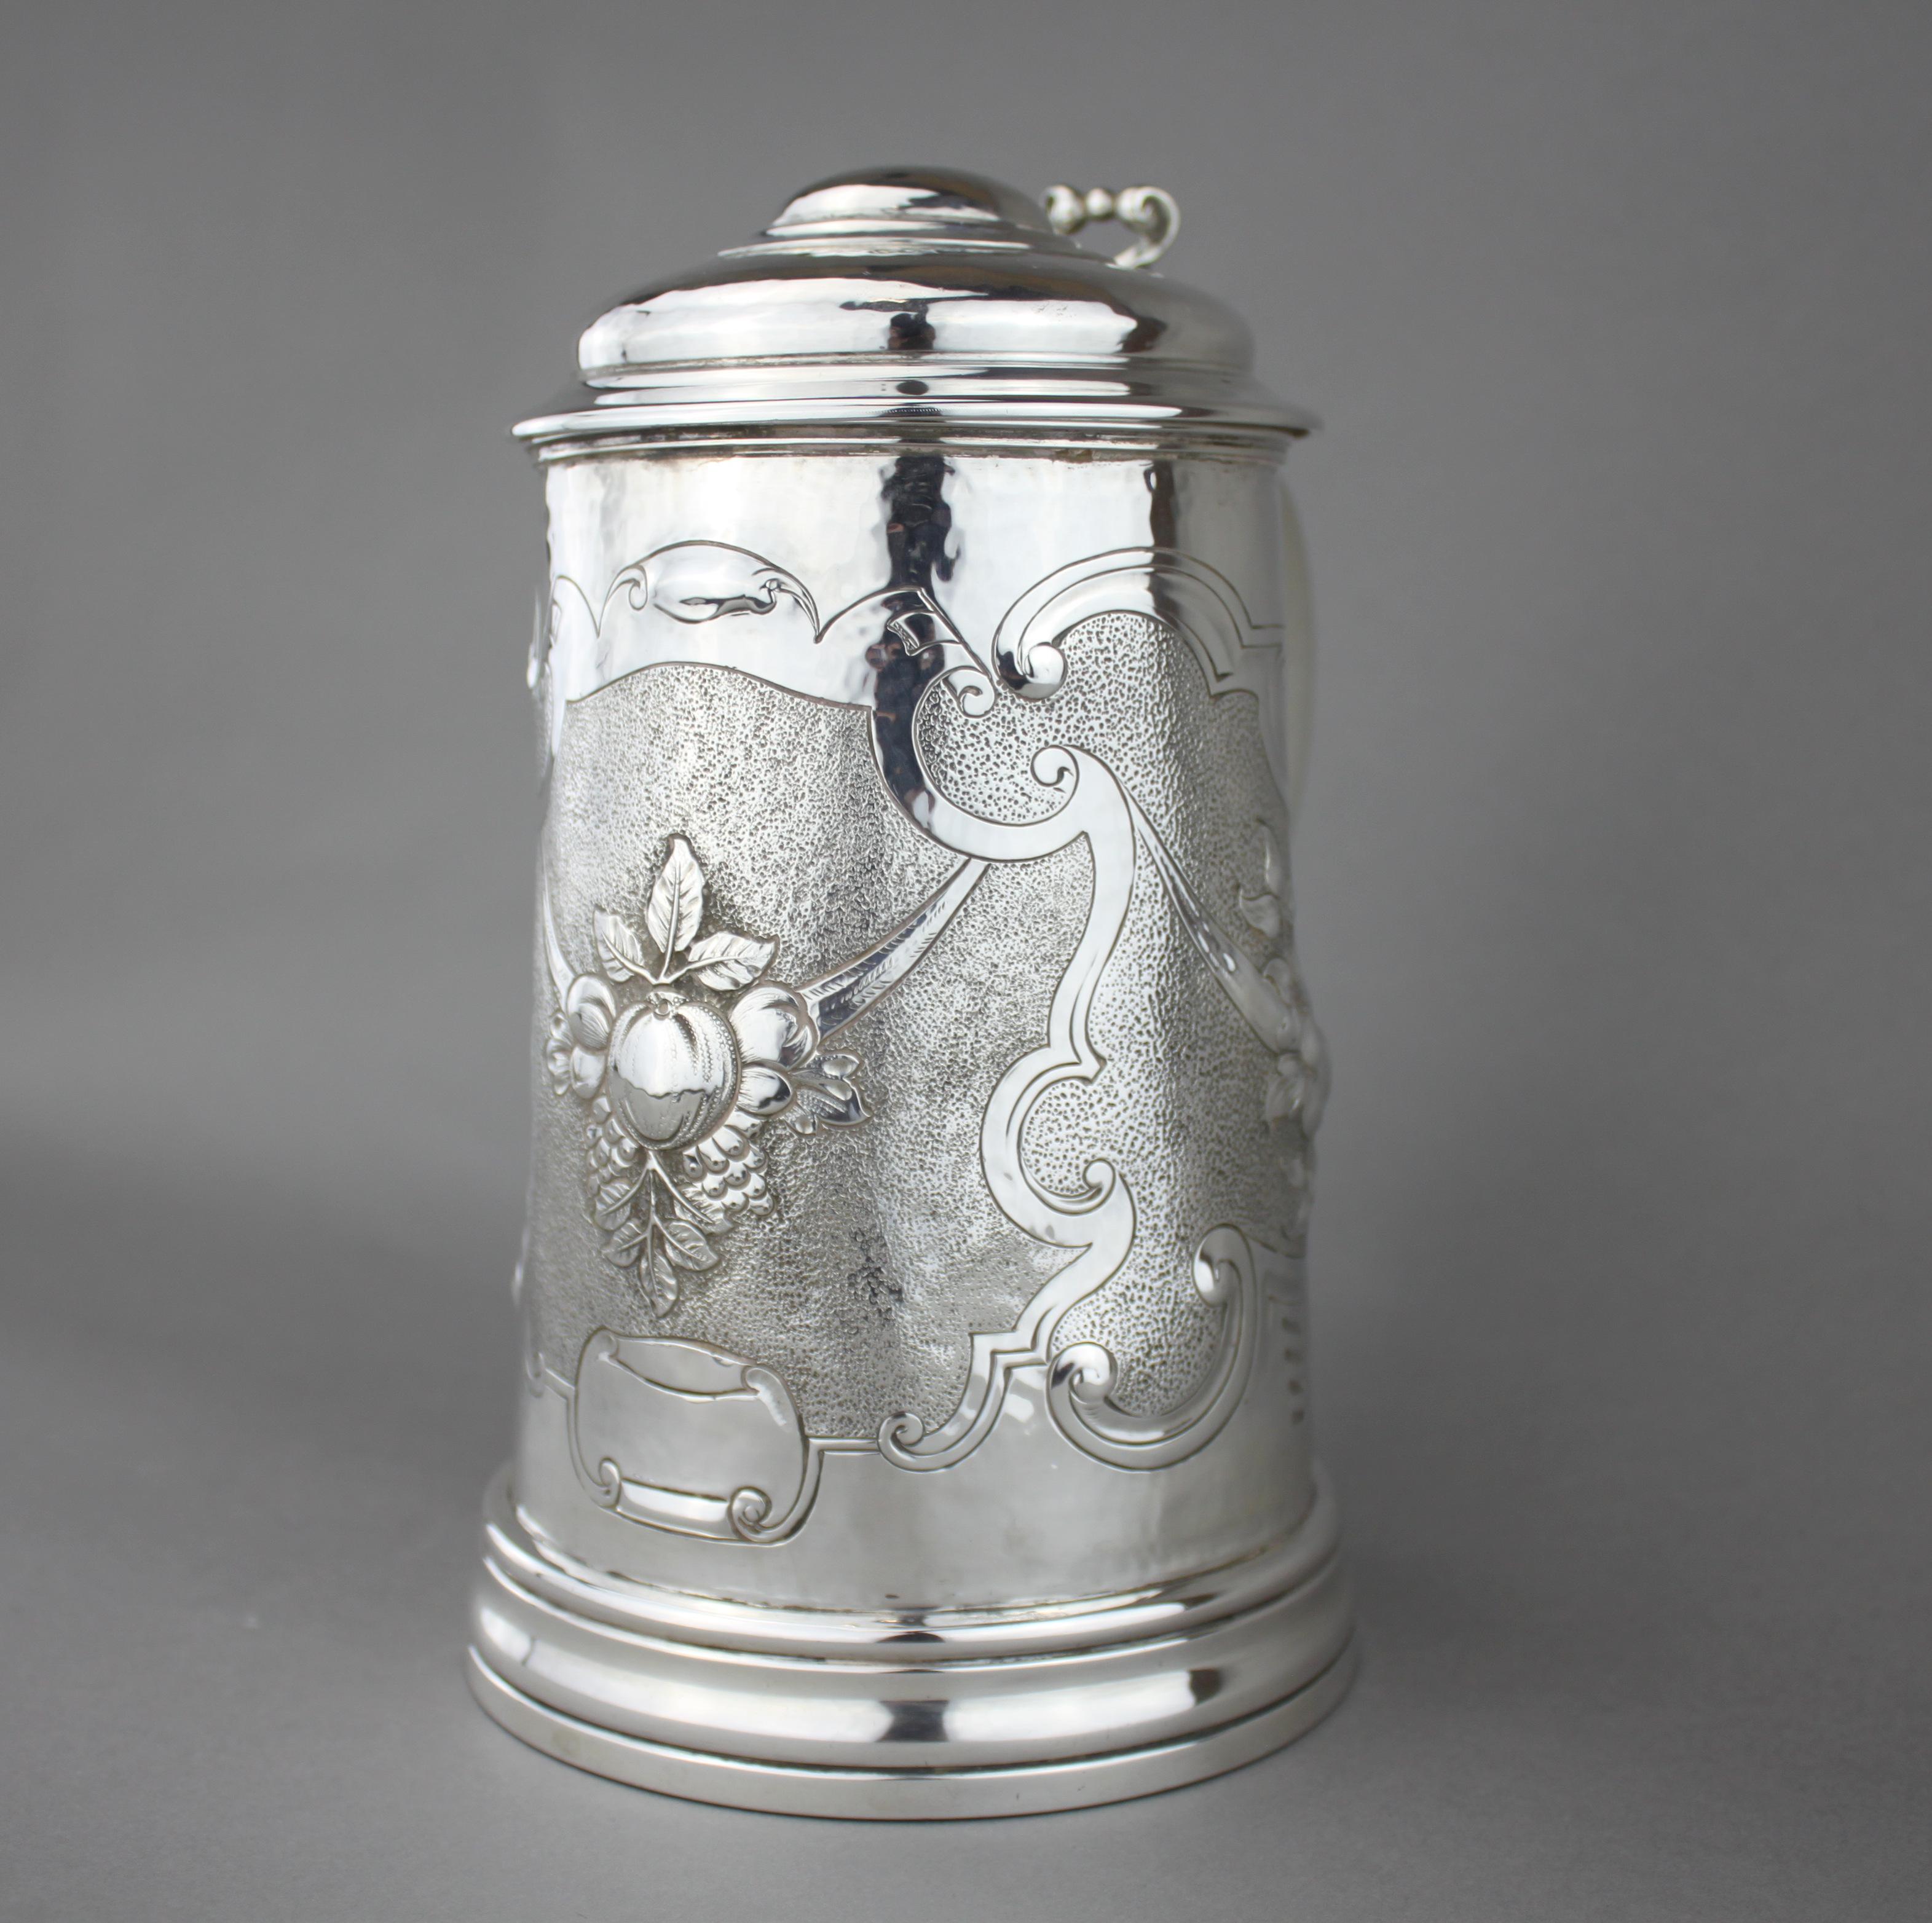 Antique large sterling silver tankard, with various floral scripture engravings
Maker: Mappin Brothers
Made in London, 1900
Fully hallmarked. 

Dimensions:
Length 19.5 cm
Diameter 13.5 cm
Height 22.5 cm
Weight: 1082 grams.

Condition: